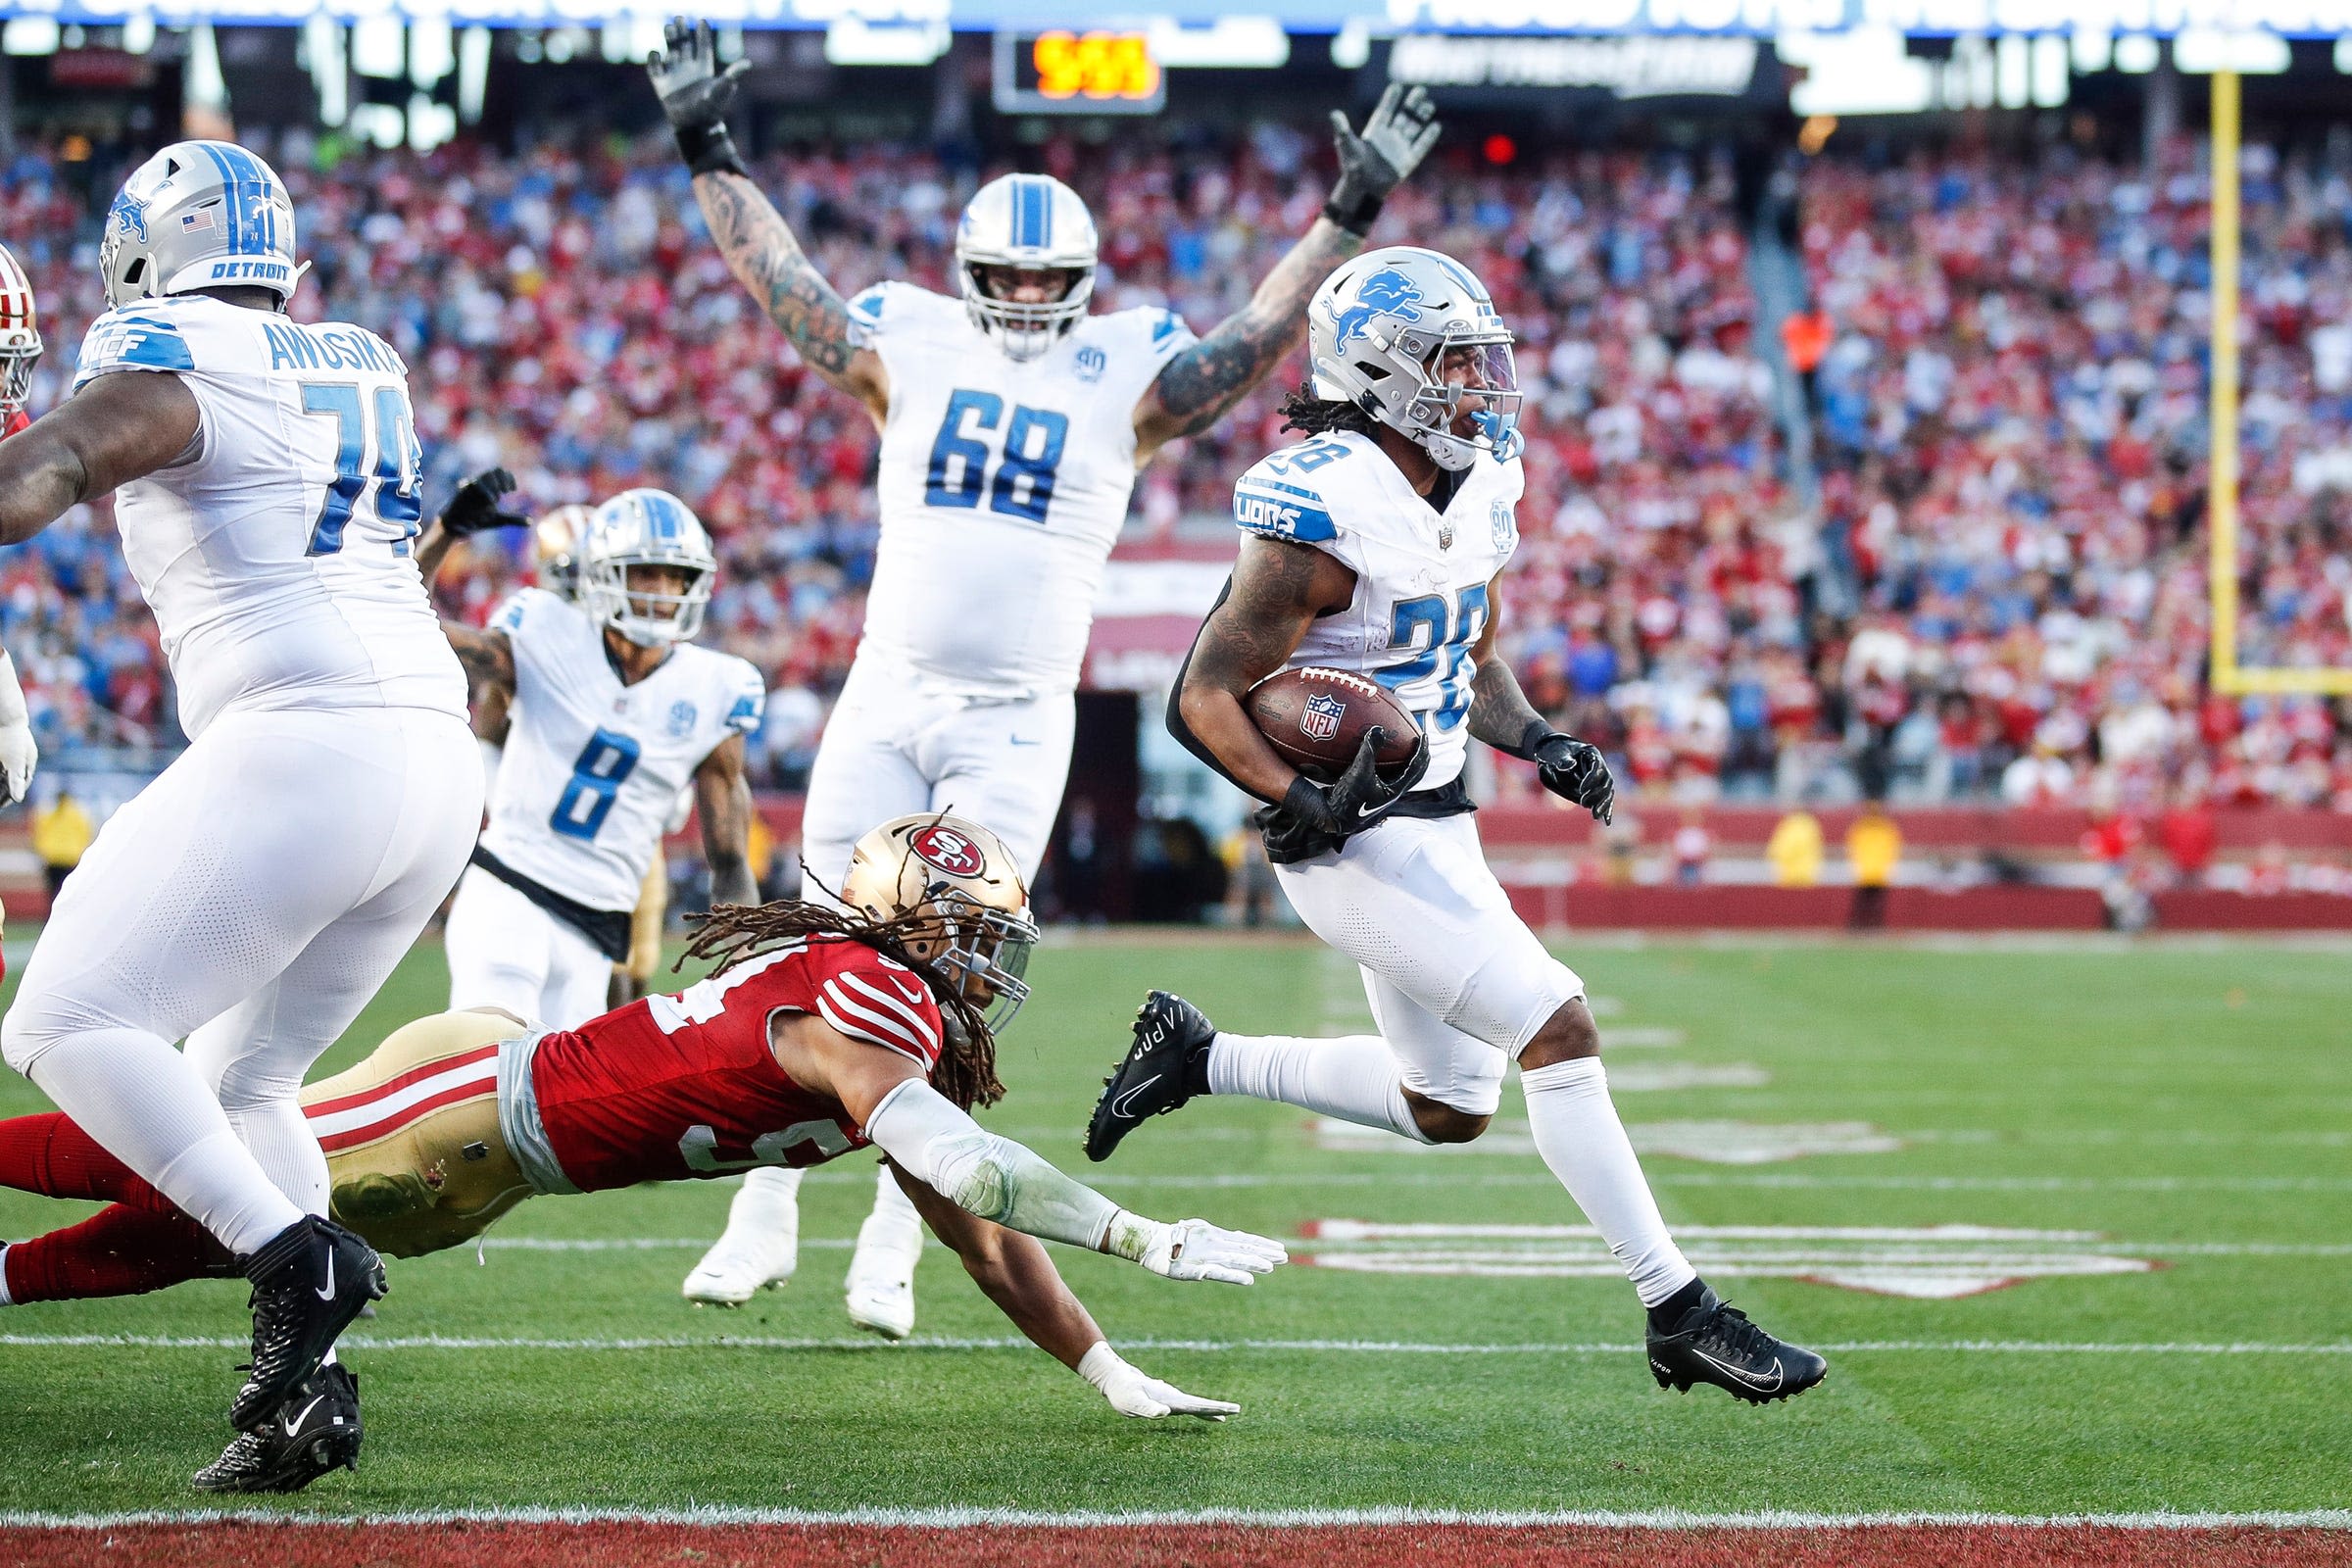 5 storylines to watch at Detroit Lions OTAs: Jahmyr Gibbs could see expanded role